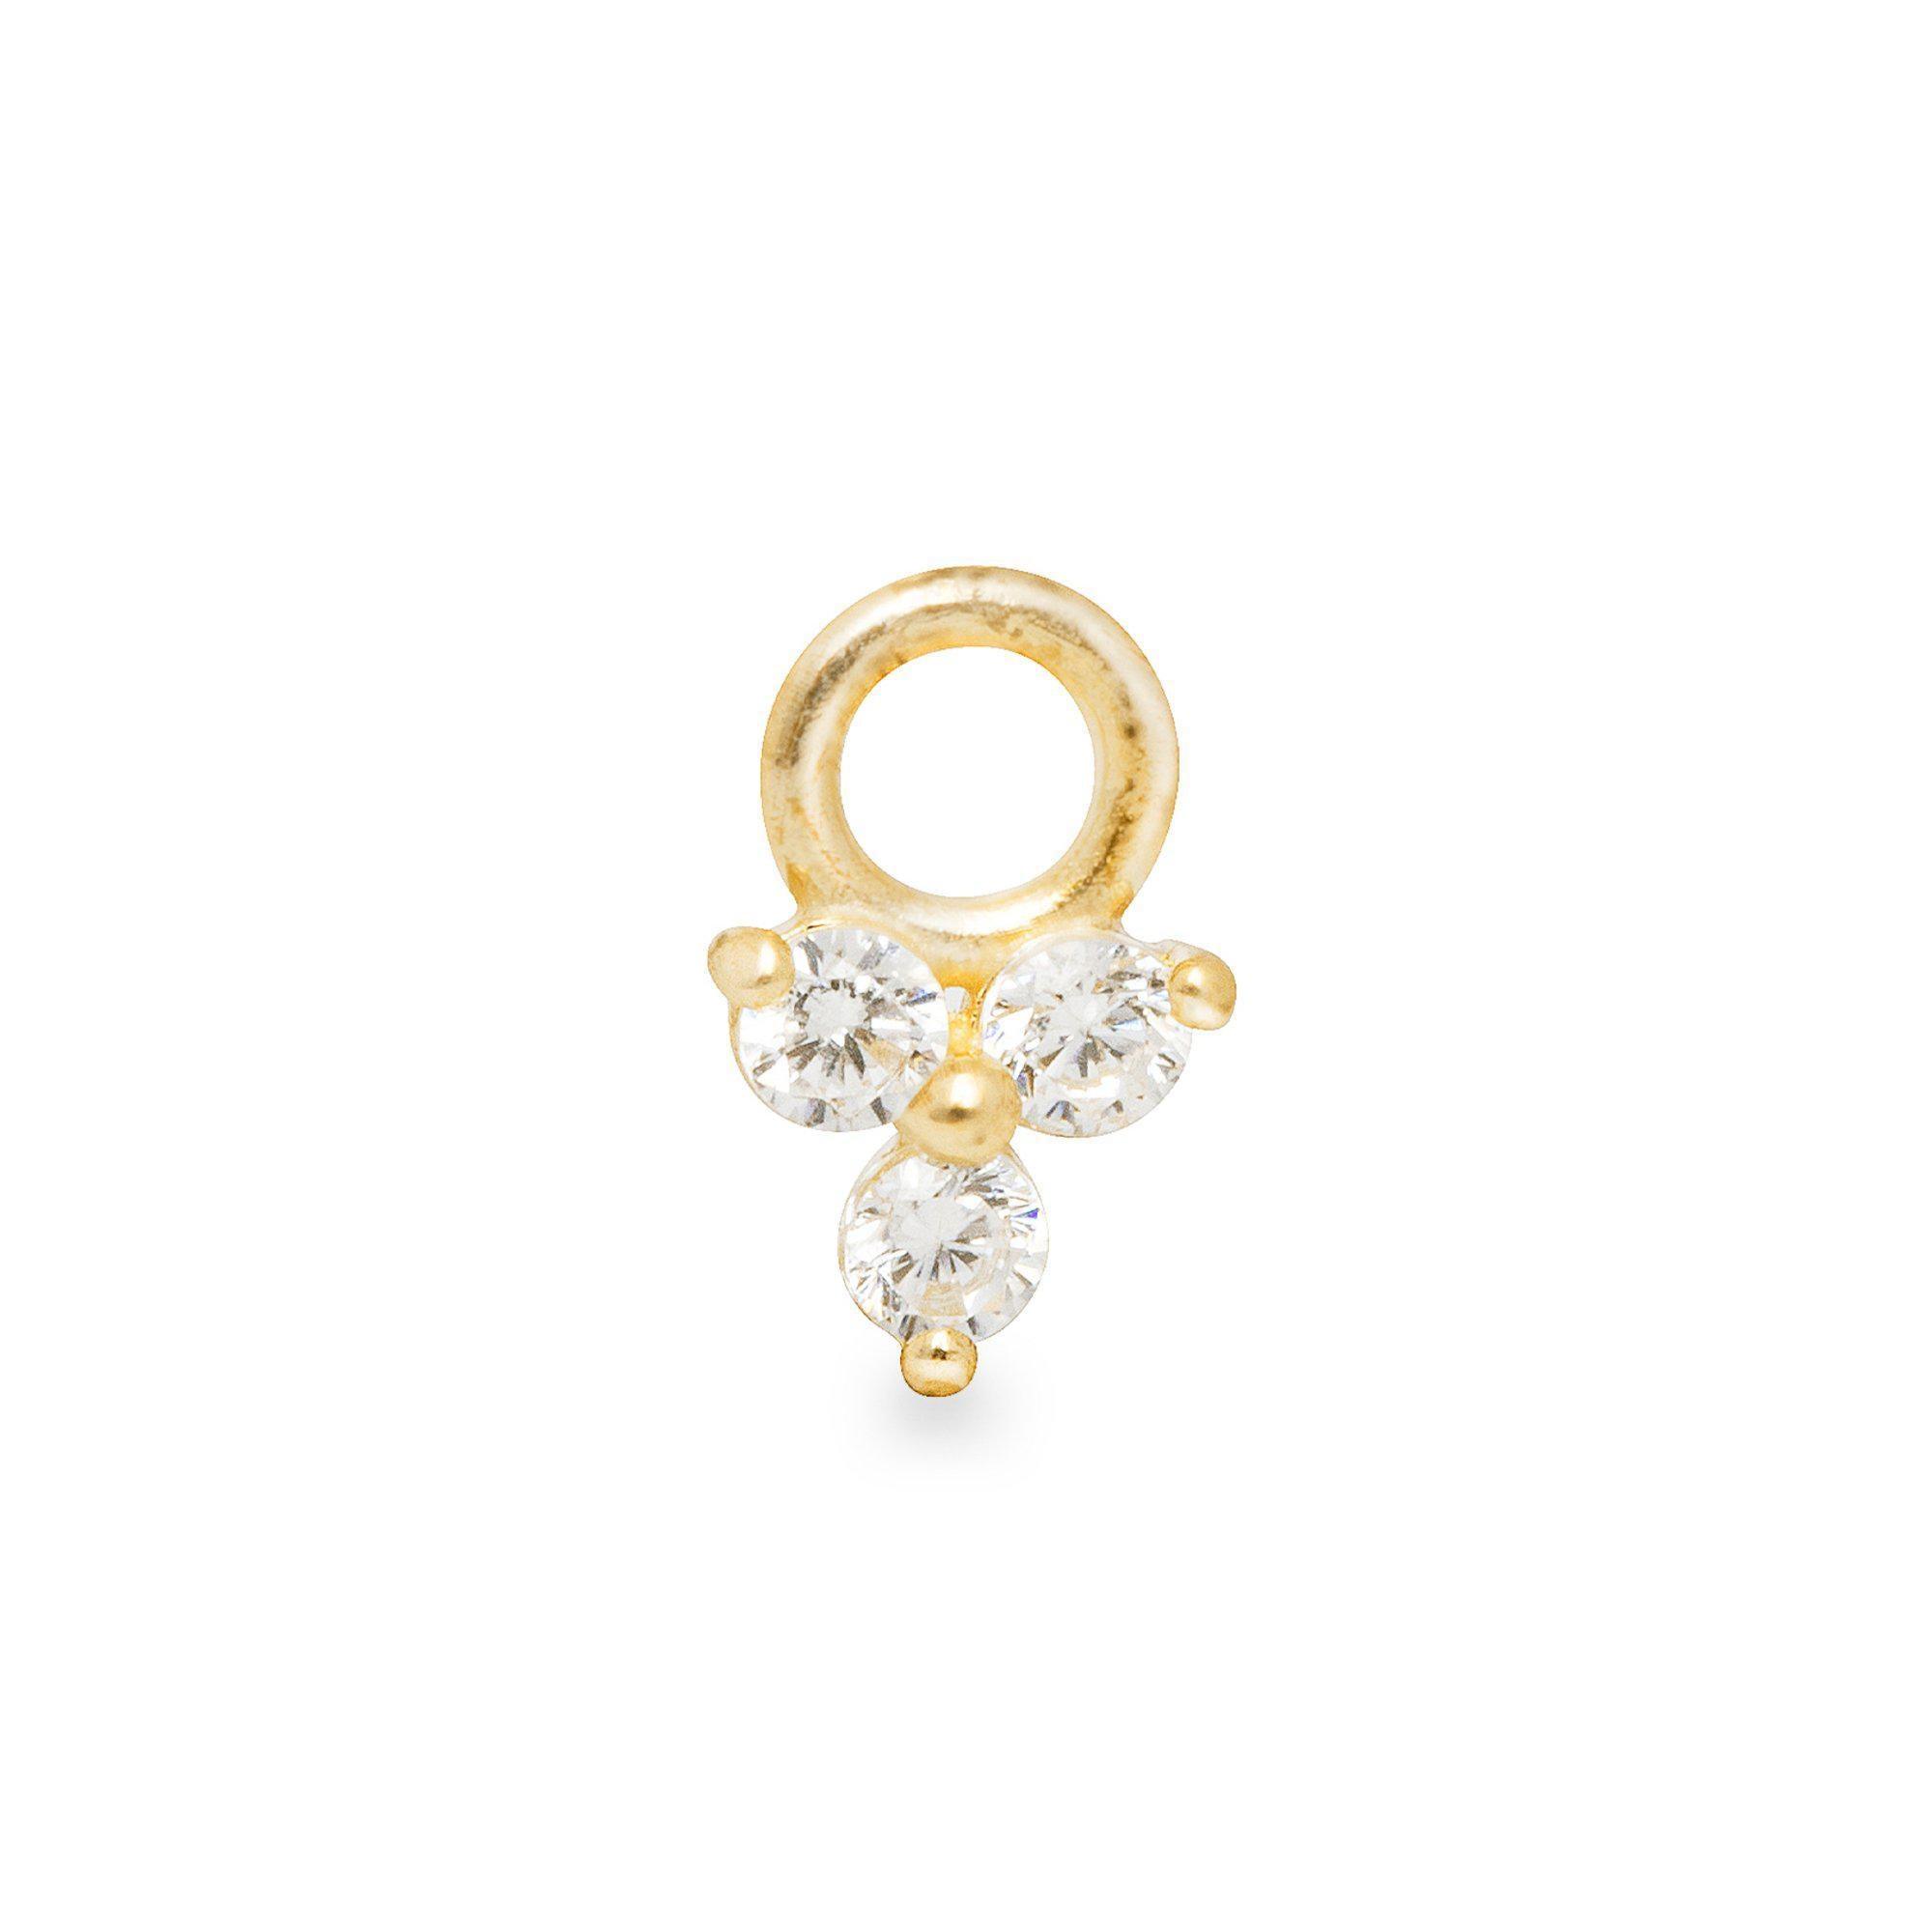 Flor single 9k solid yellow gold tiny 3 crystal charm for hinged segment earring - Helix & Conch